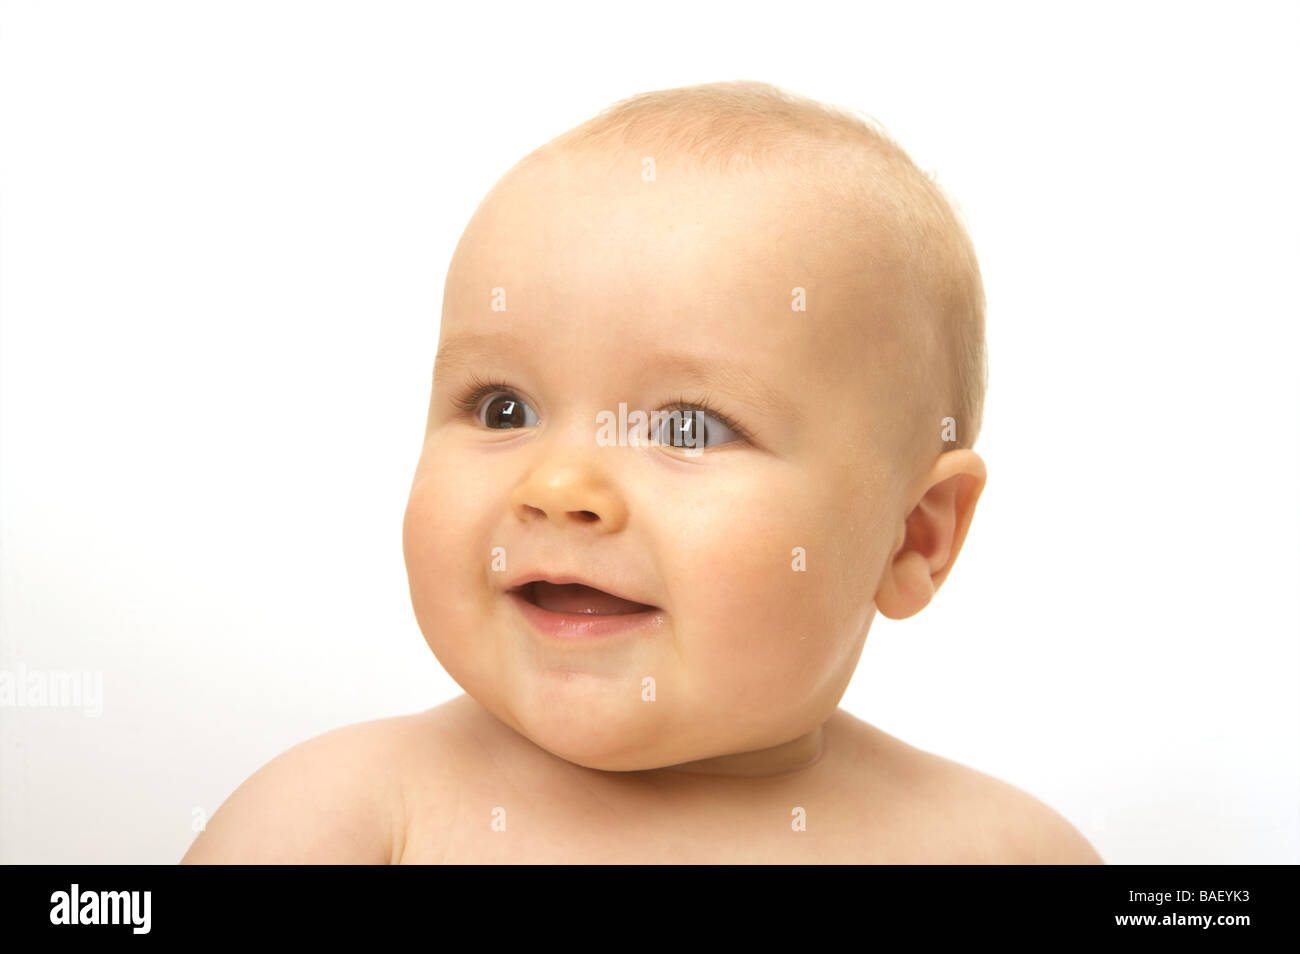 A happy smiling baby looks away on a white background Stock Photo